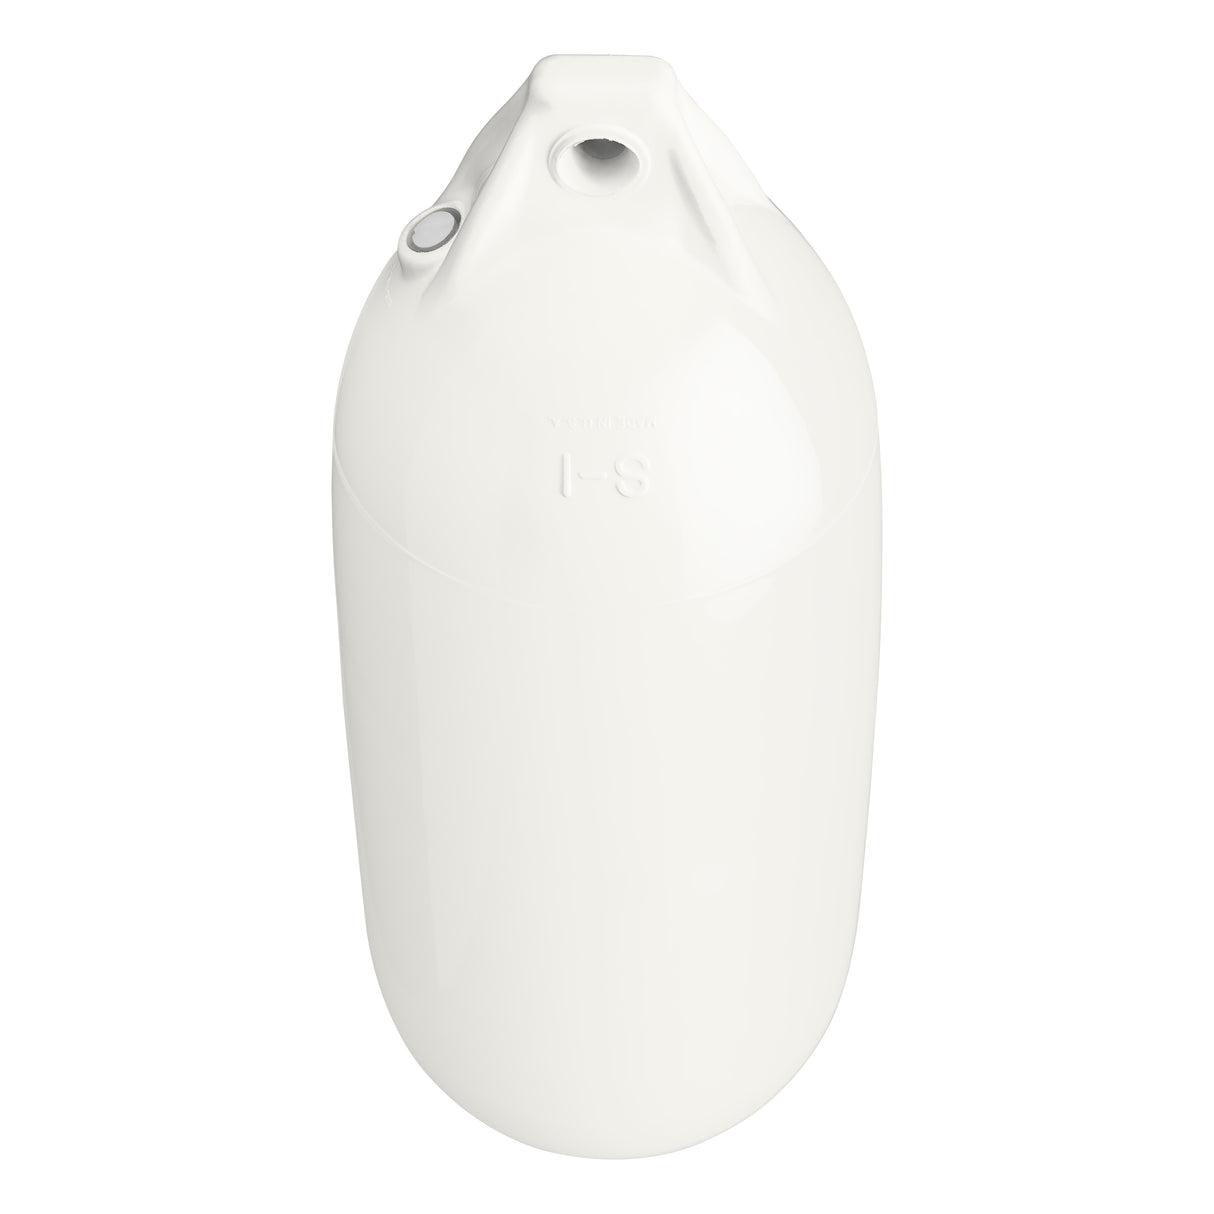 Small buoy and boat fender, Polyform S-1 White angled shot